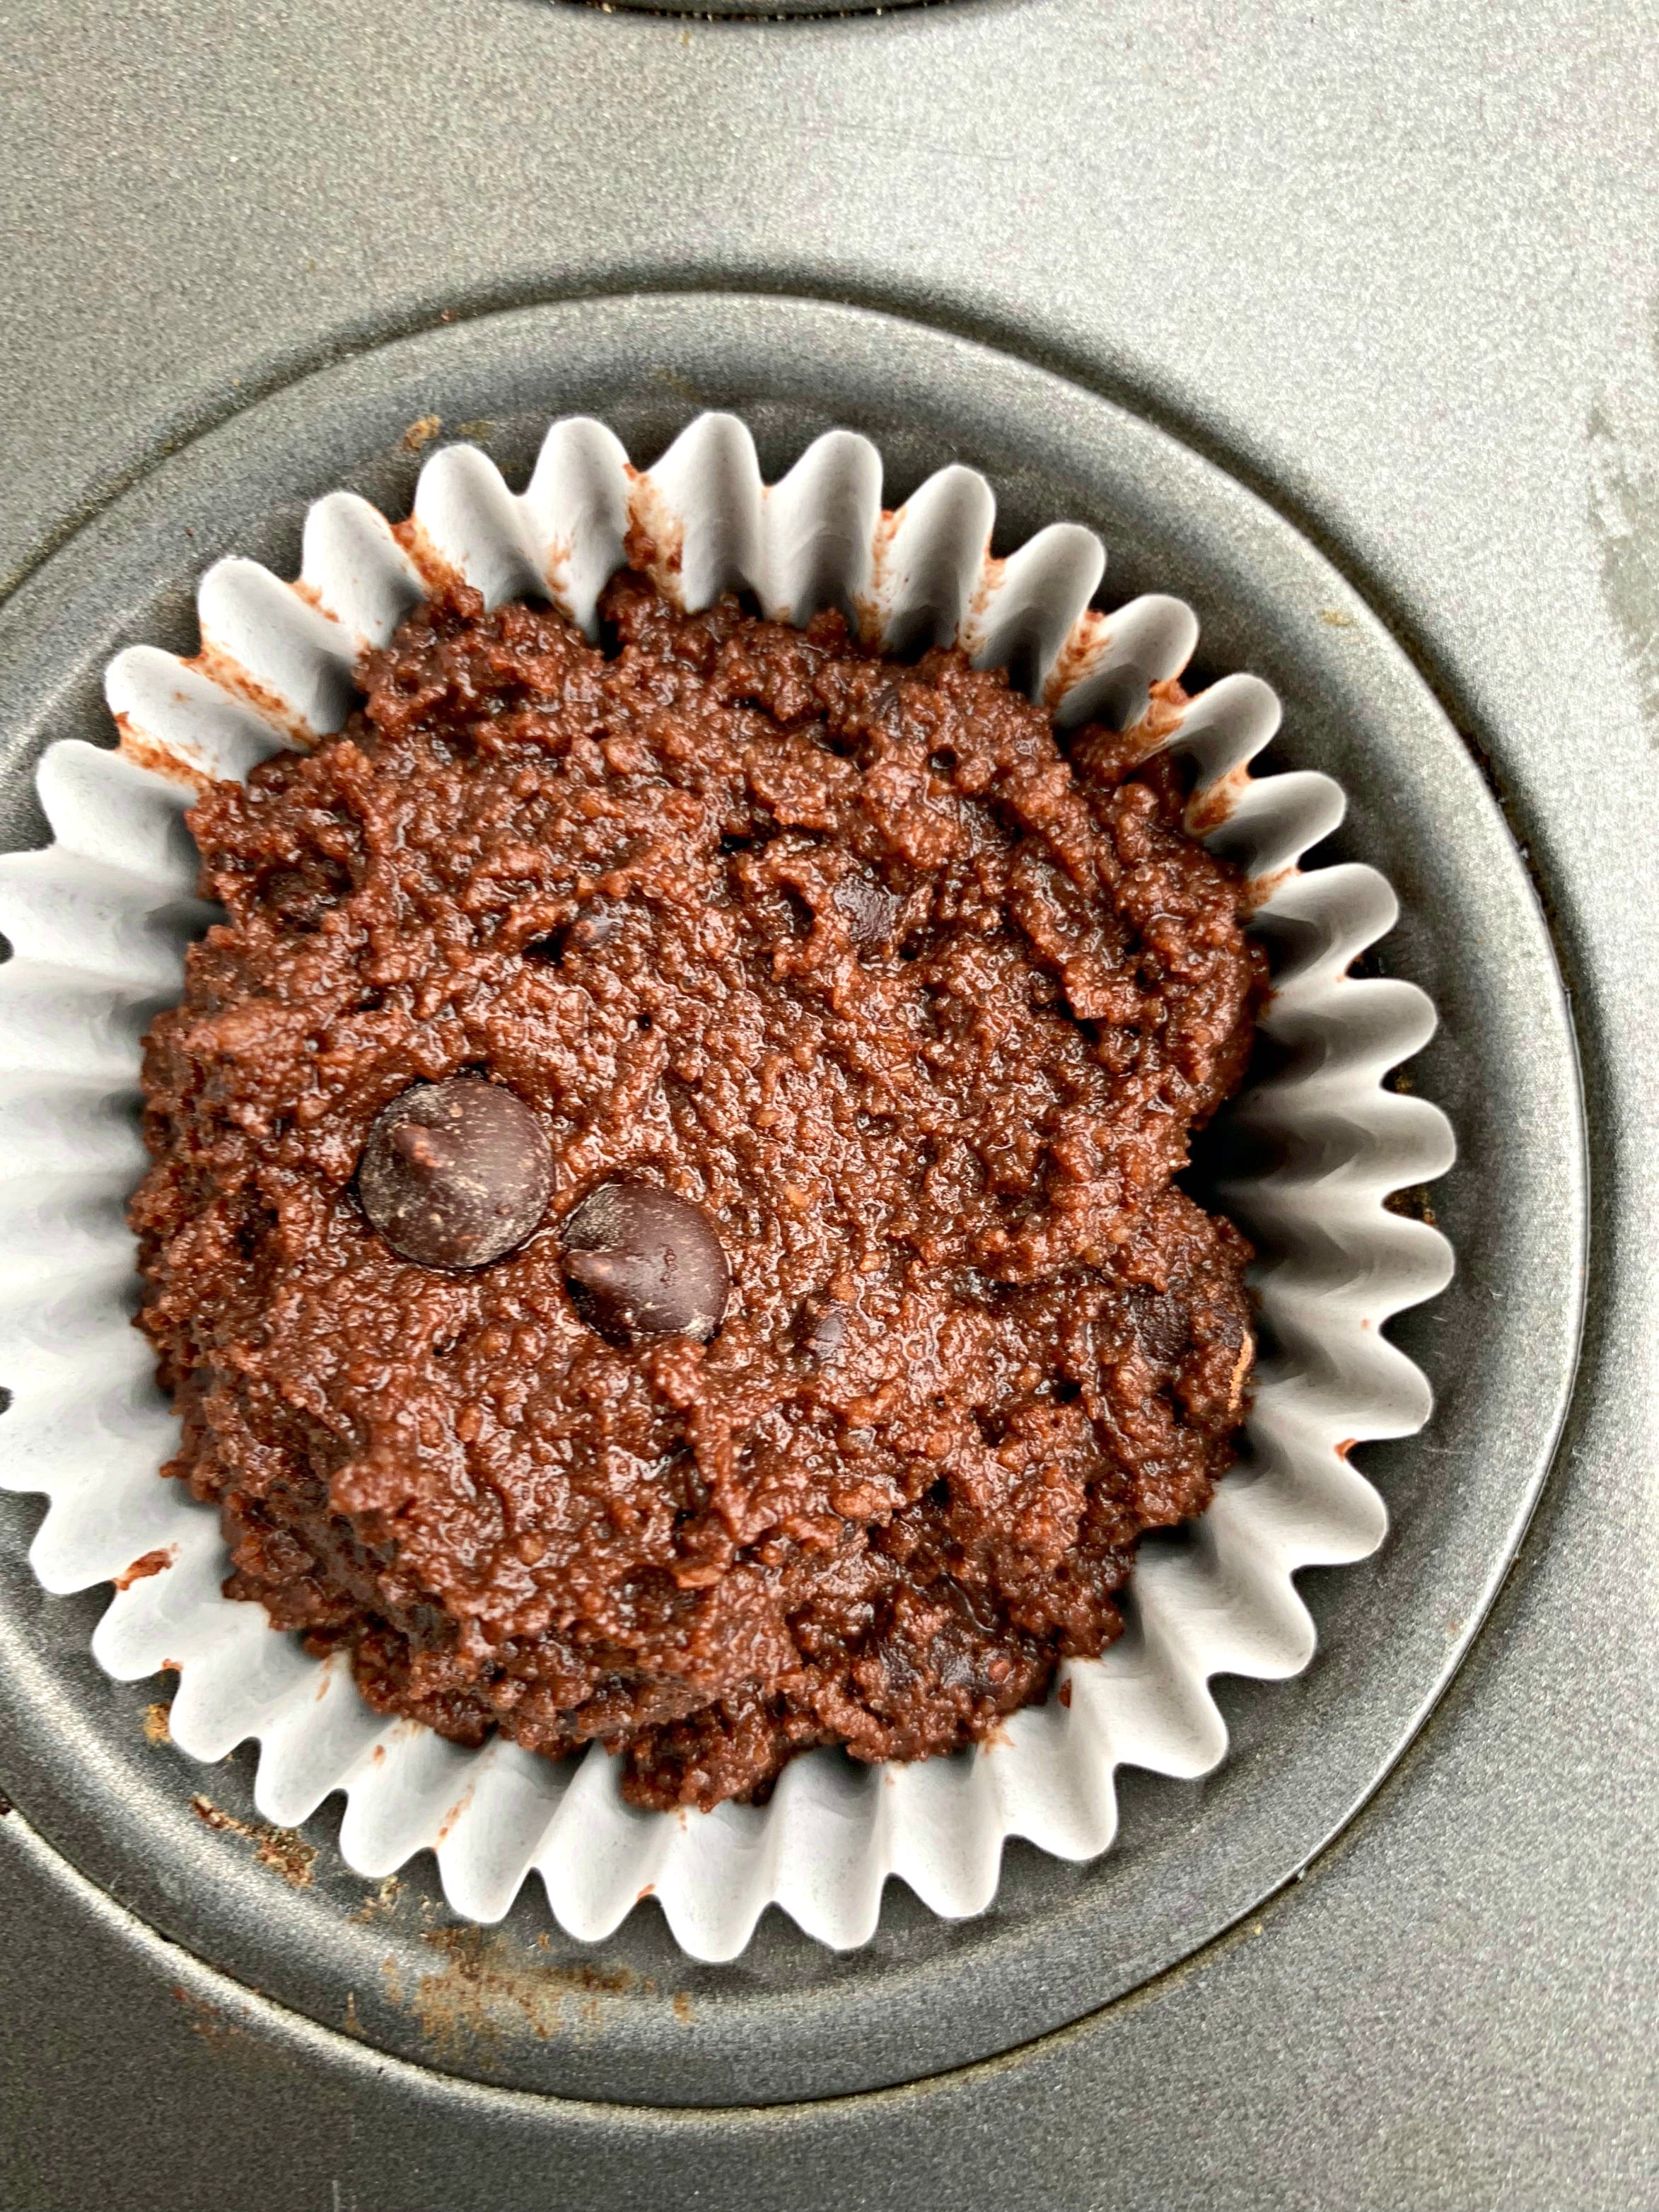 keto low carb chocolate muffins in a muffin tin (pre-baked)